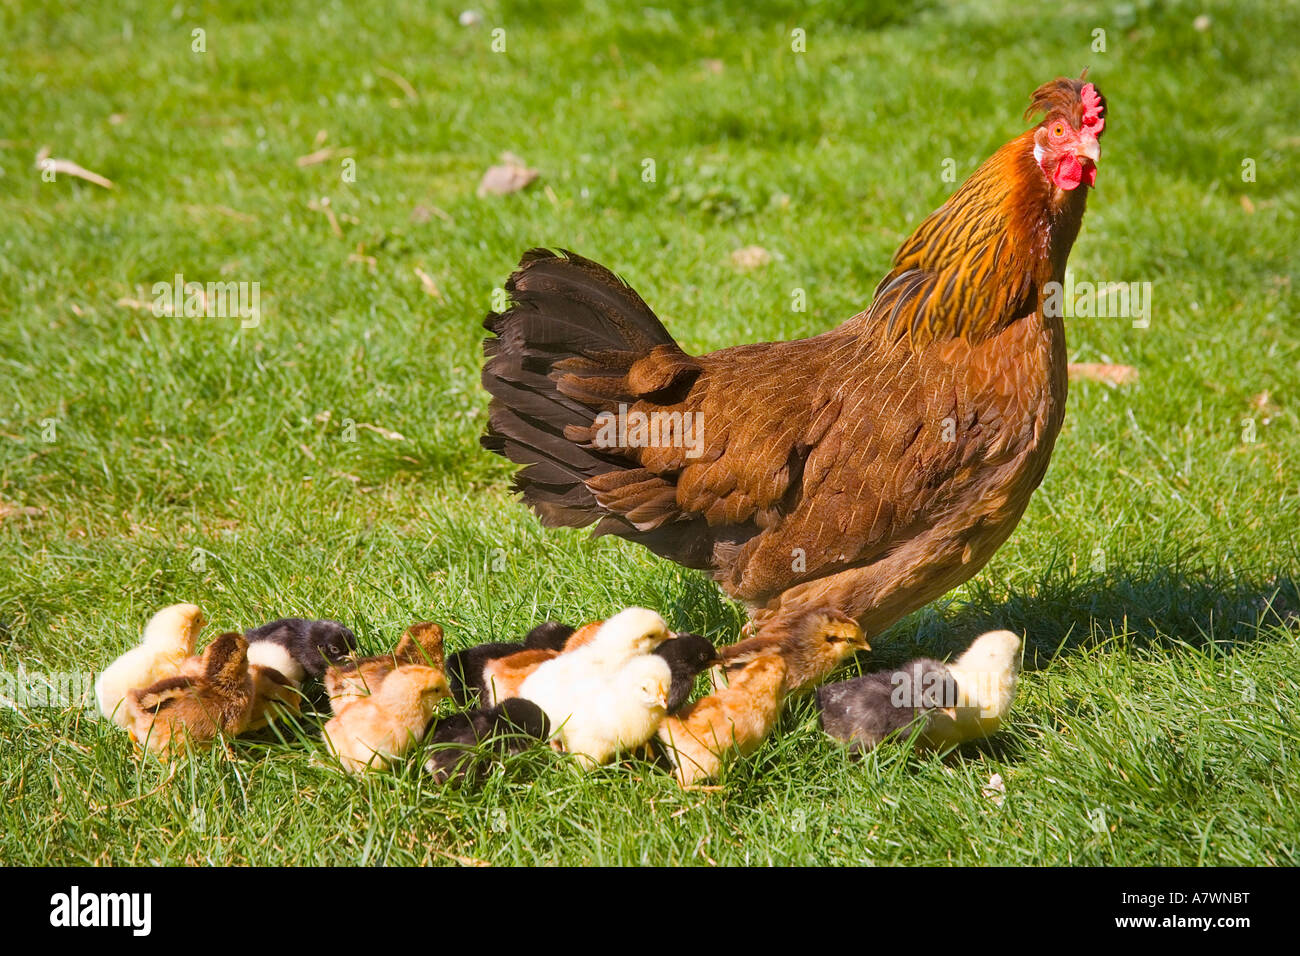 Hen with young chicks Stock Photo